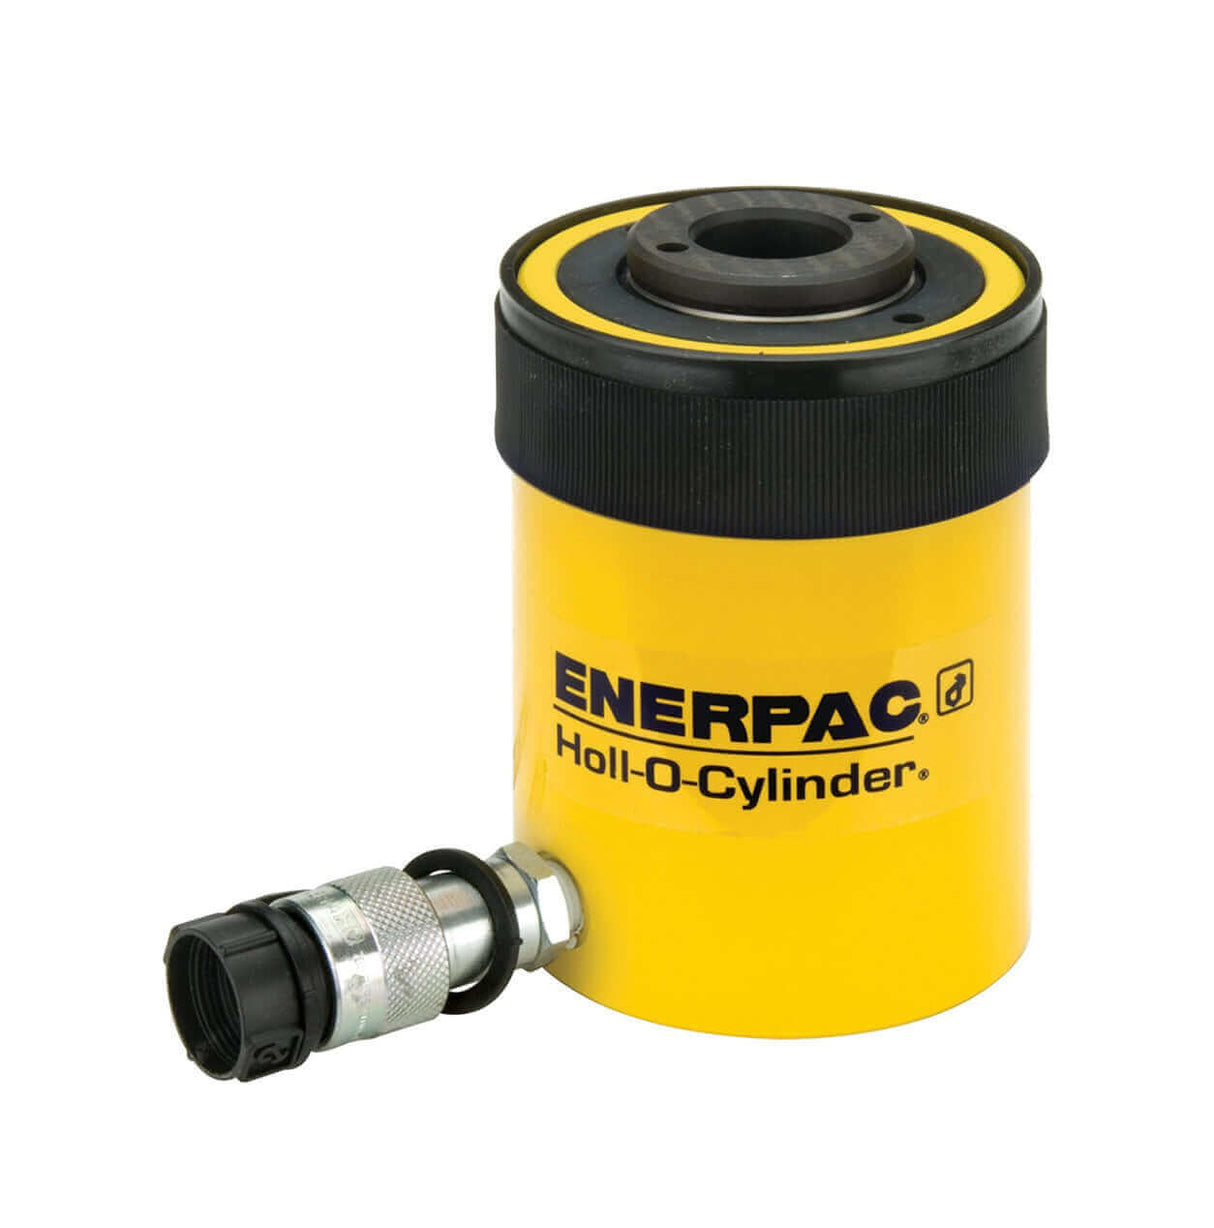 Enerpac 13.8 Ton Hollow Plunger Cylinder, 1.63" Stroke